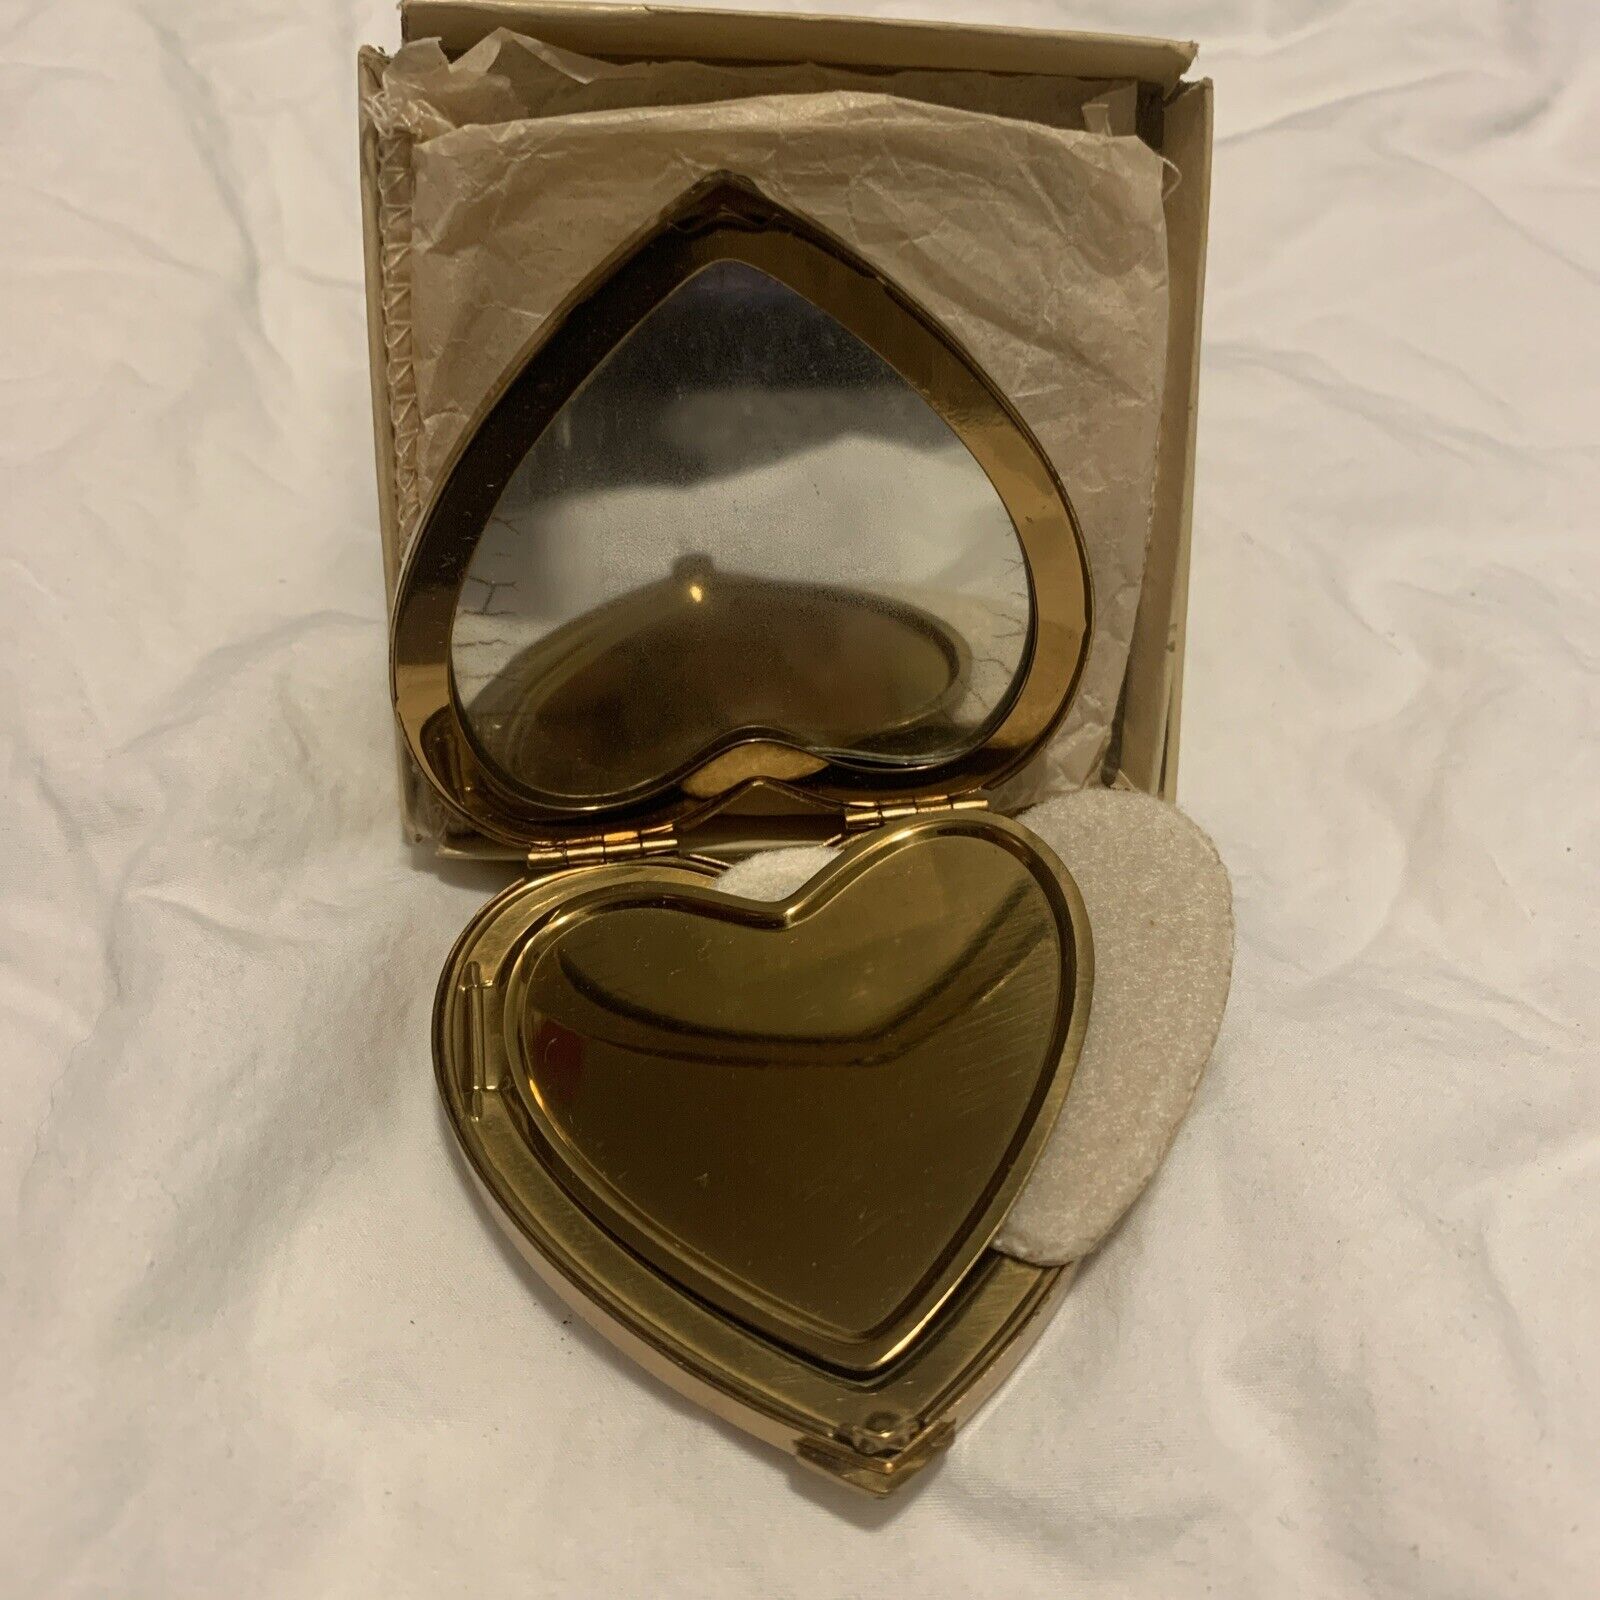 Vintage 1940’s gold tone heart-shaped compact/Mirror, applicator, by superb case